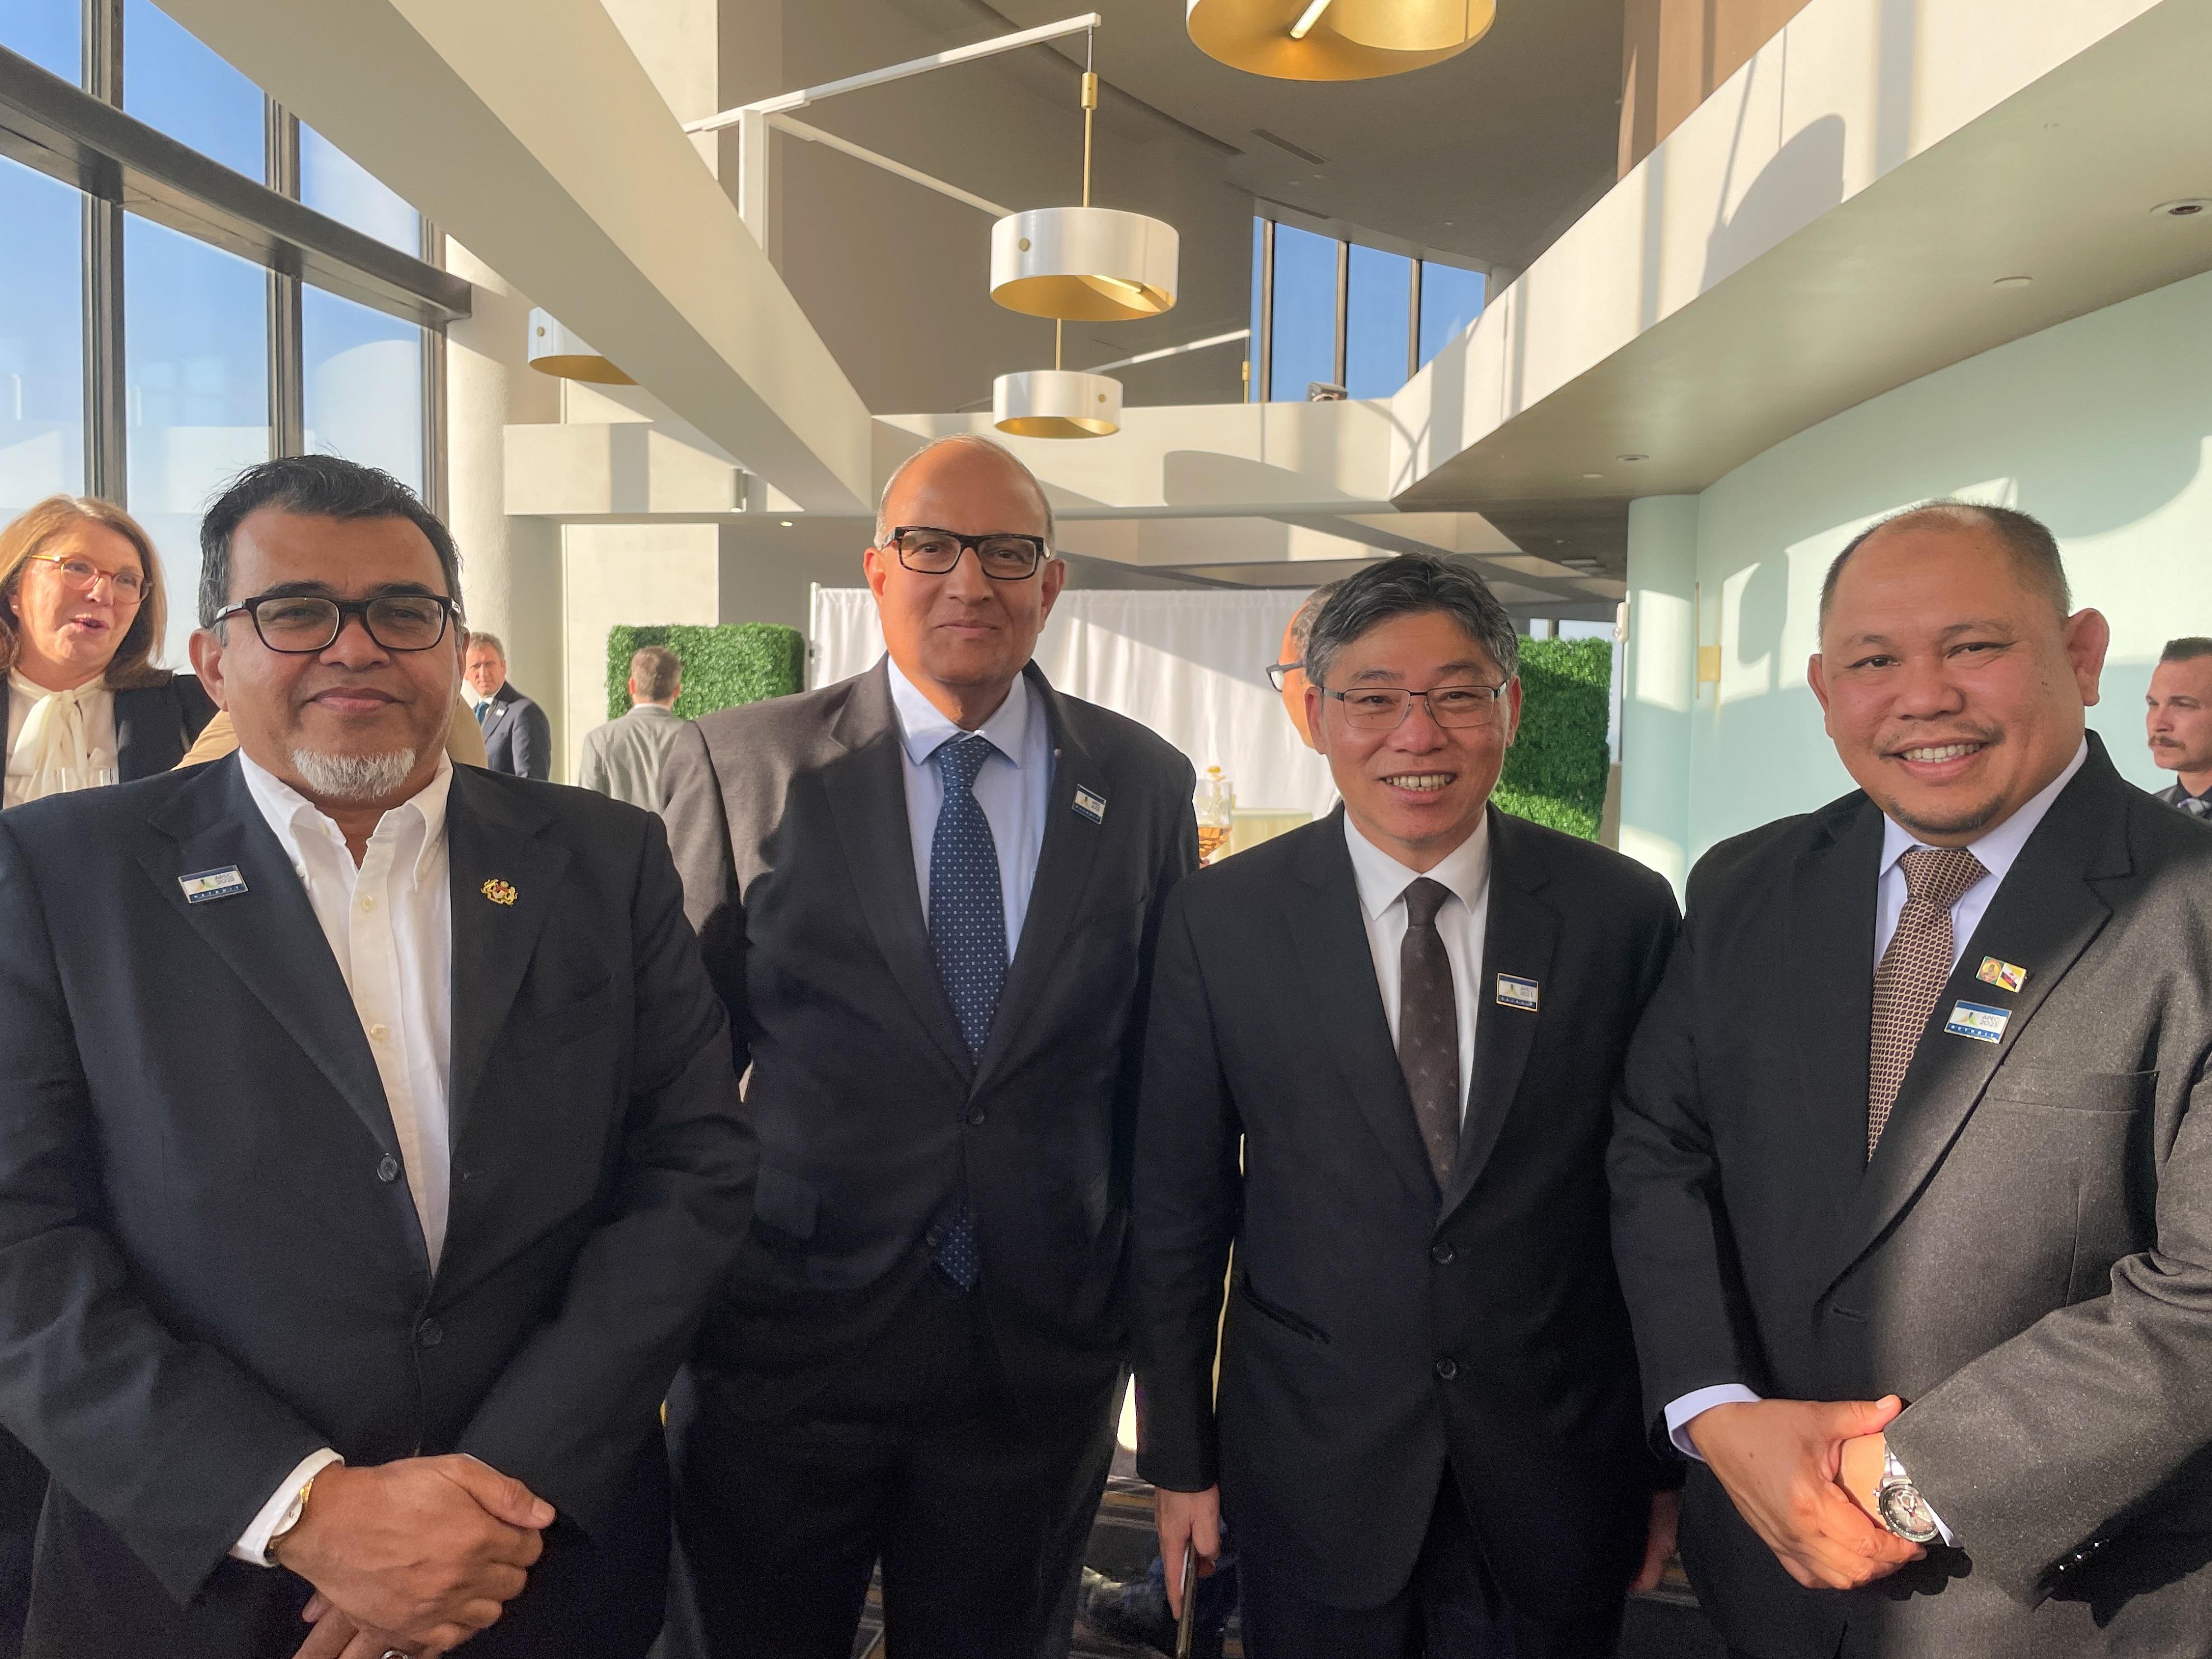 The Secretary for Transport and Logistics, Mr Lam Sai-hung (second right), is pictured with the representatives of Malaysia, Singapore and Brunei Darussalam (from left) during the 11th Asia-Pacific Economic Cooperation Transportation Ministerial Meeting in Detroit, the United States (US), yesterday (May 15, US time).